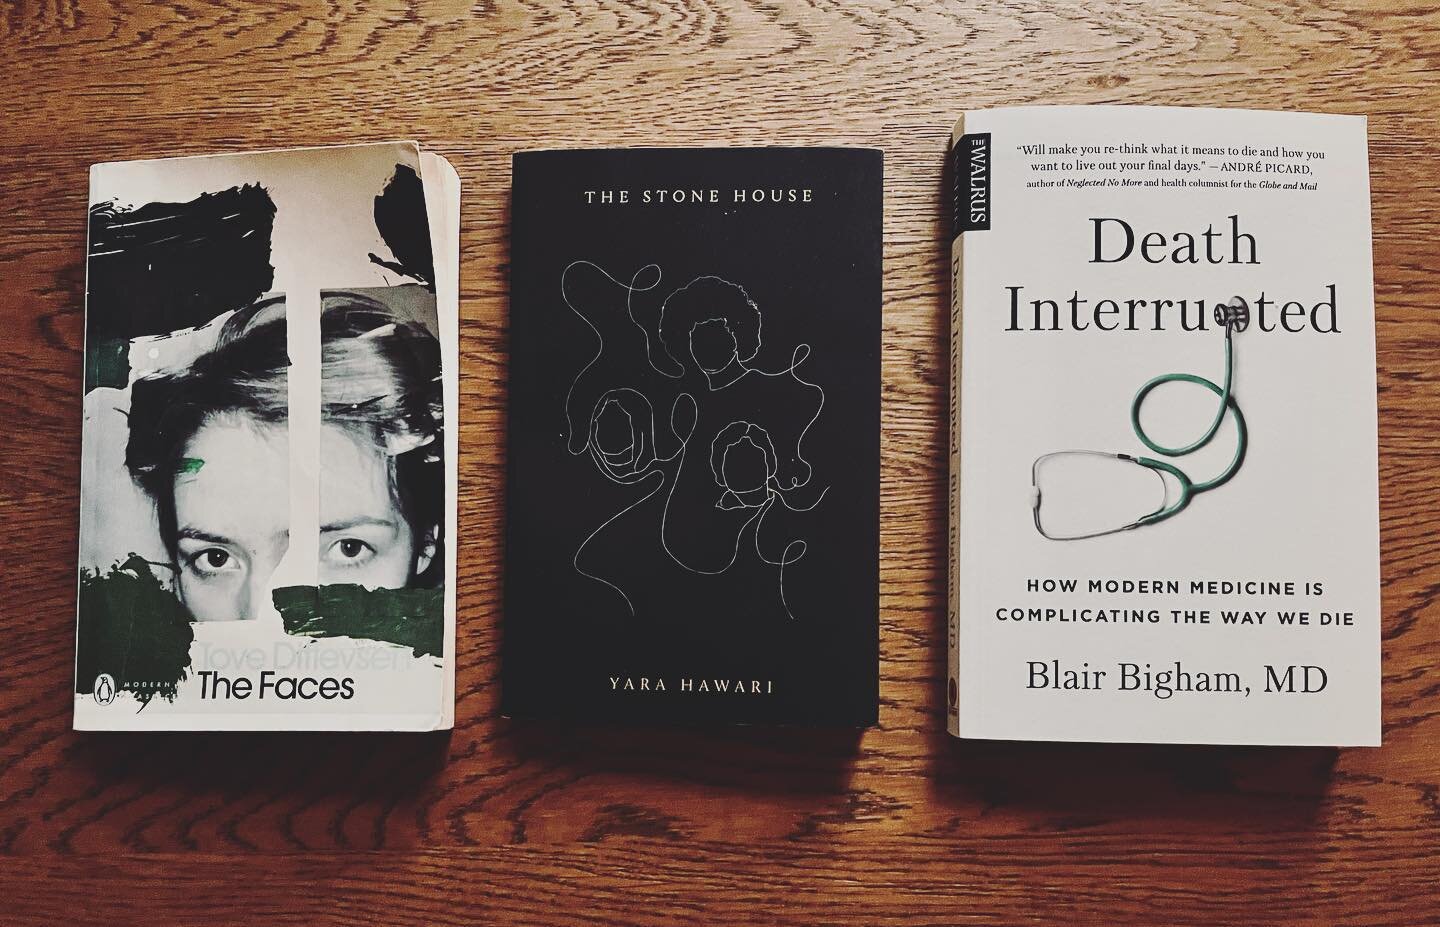 first books of 2023.

[ID: books on a wooden table: The Faces by Tove Dittevsen next to The Stone House by Yara Hawari and Death Interrupted by Blair Bigham. End of description.]